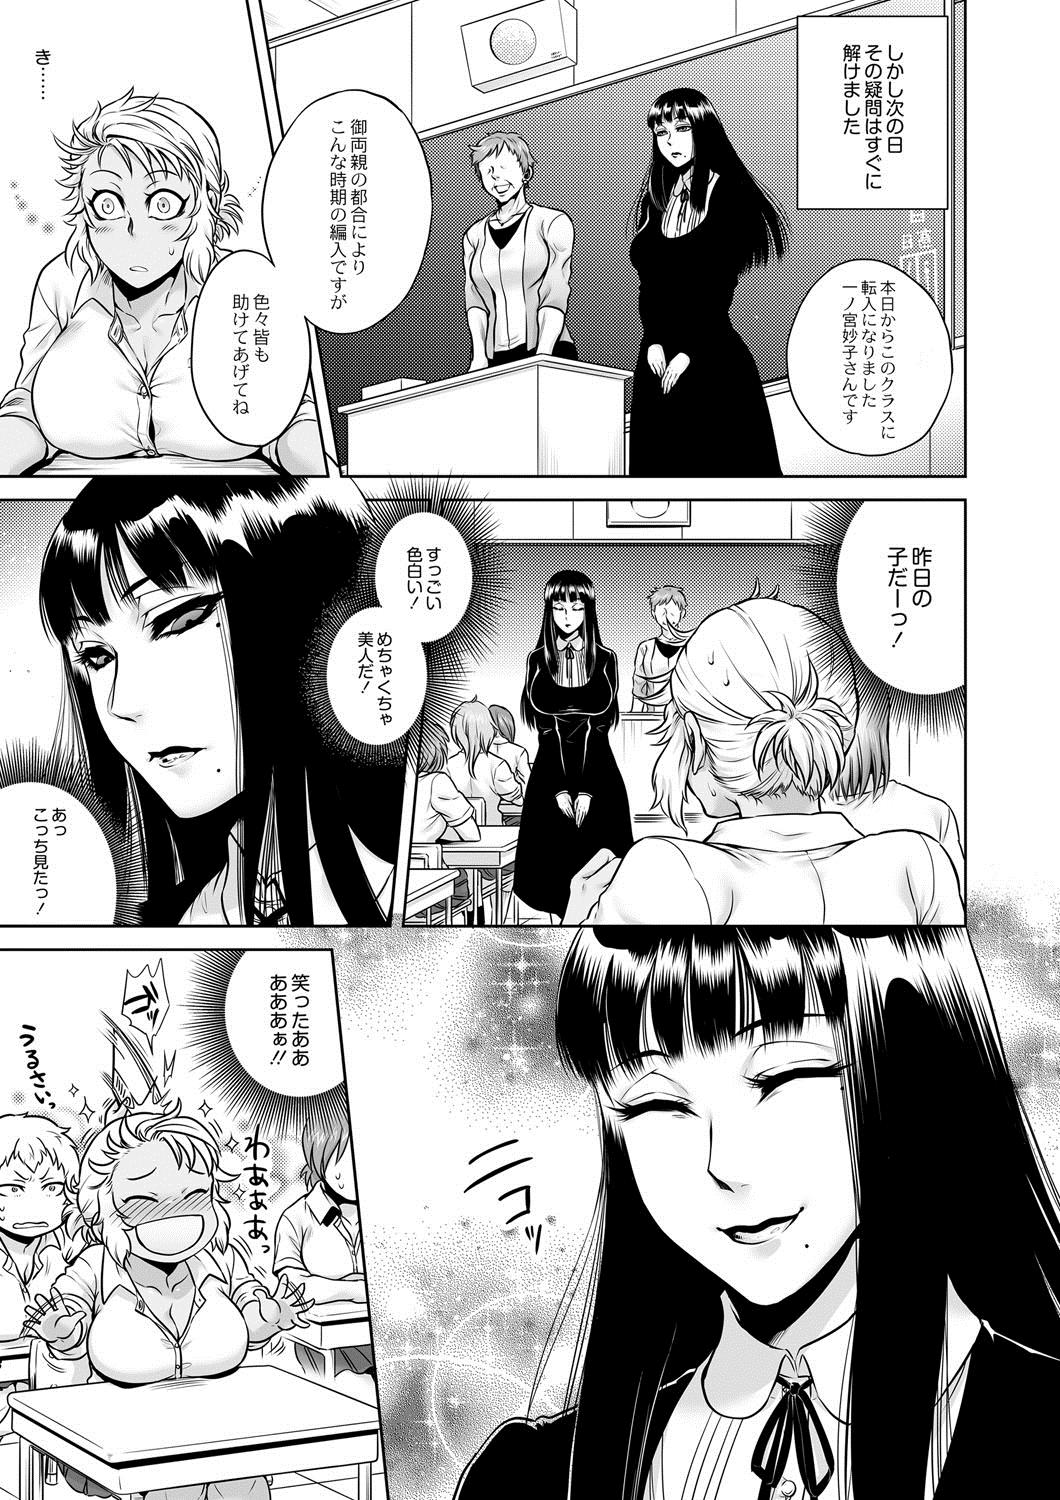 Straight Igyou Kaikitan Mannequin Parties - Page 3